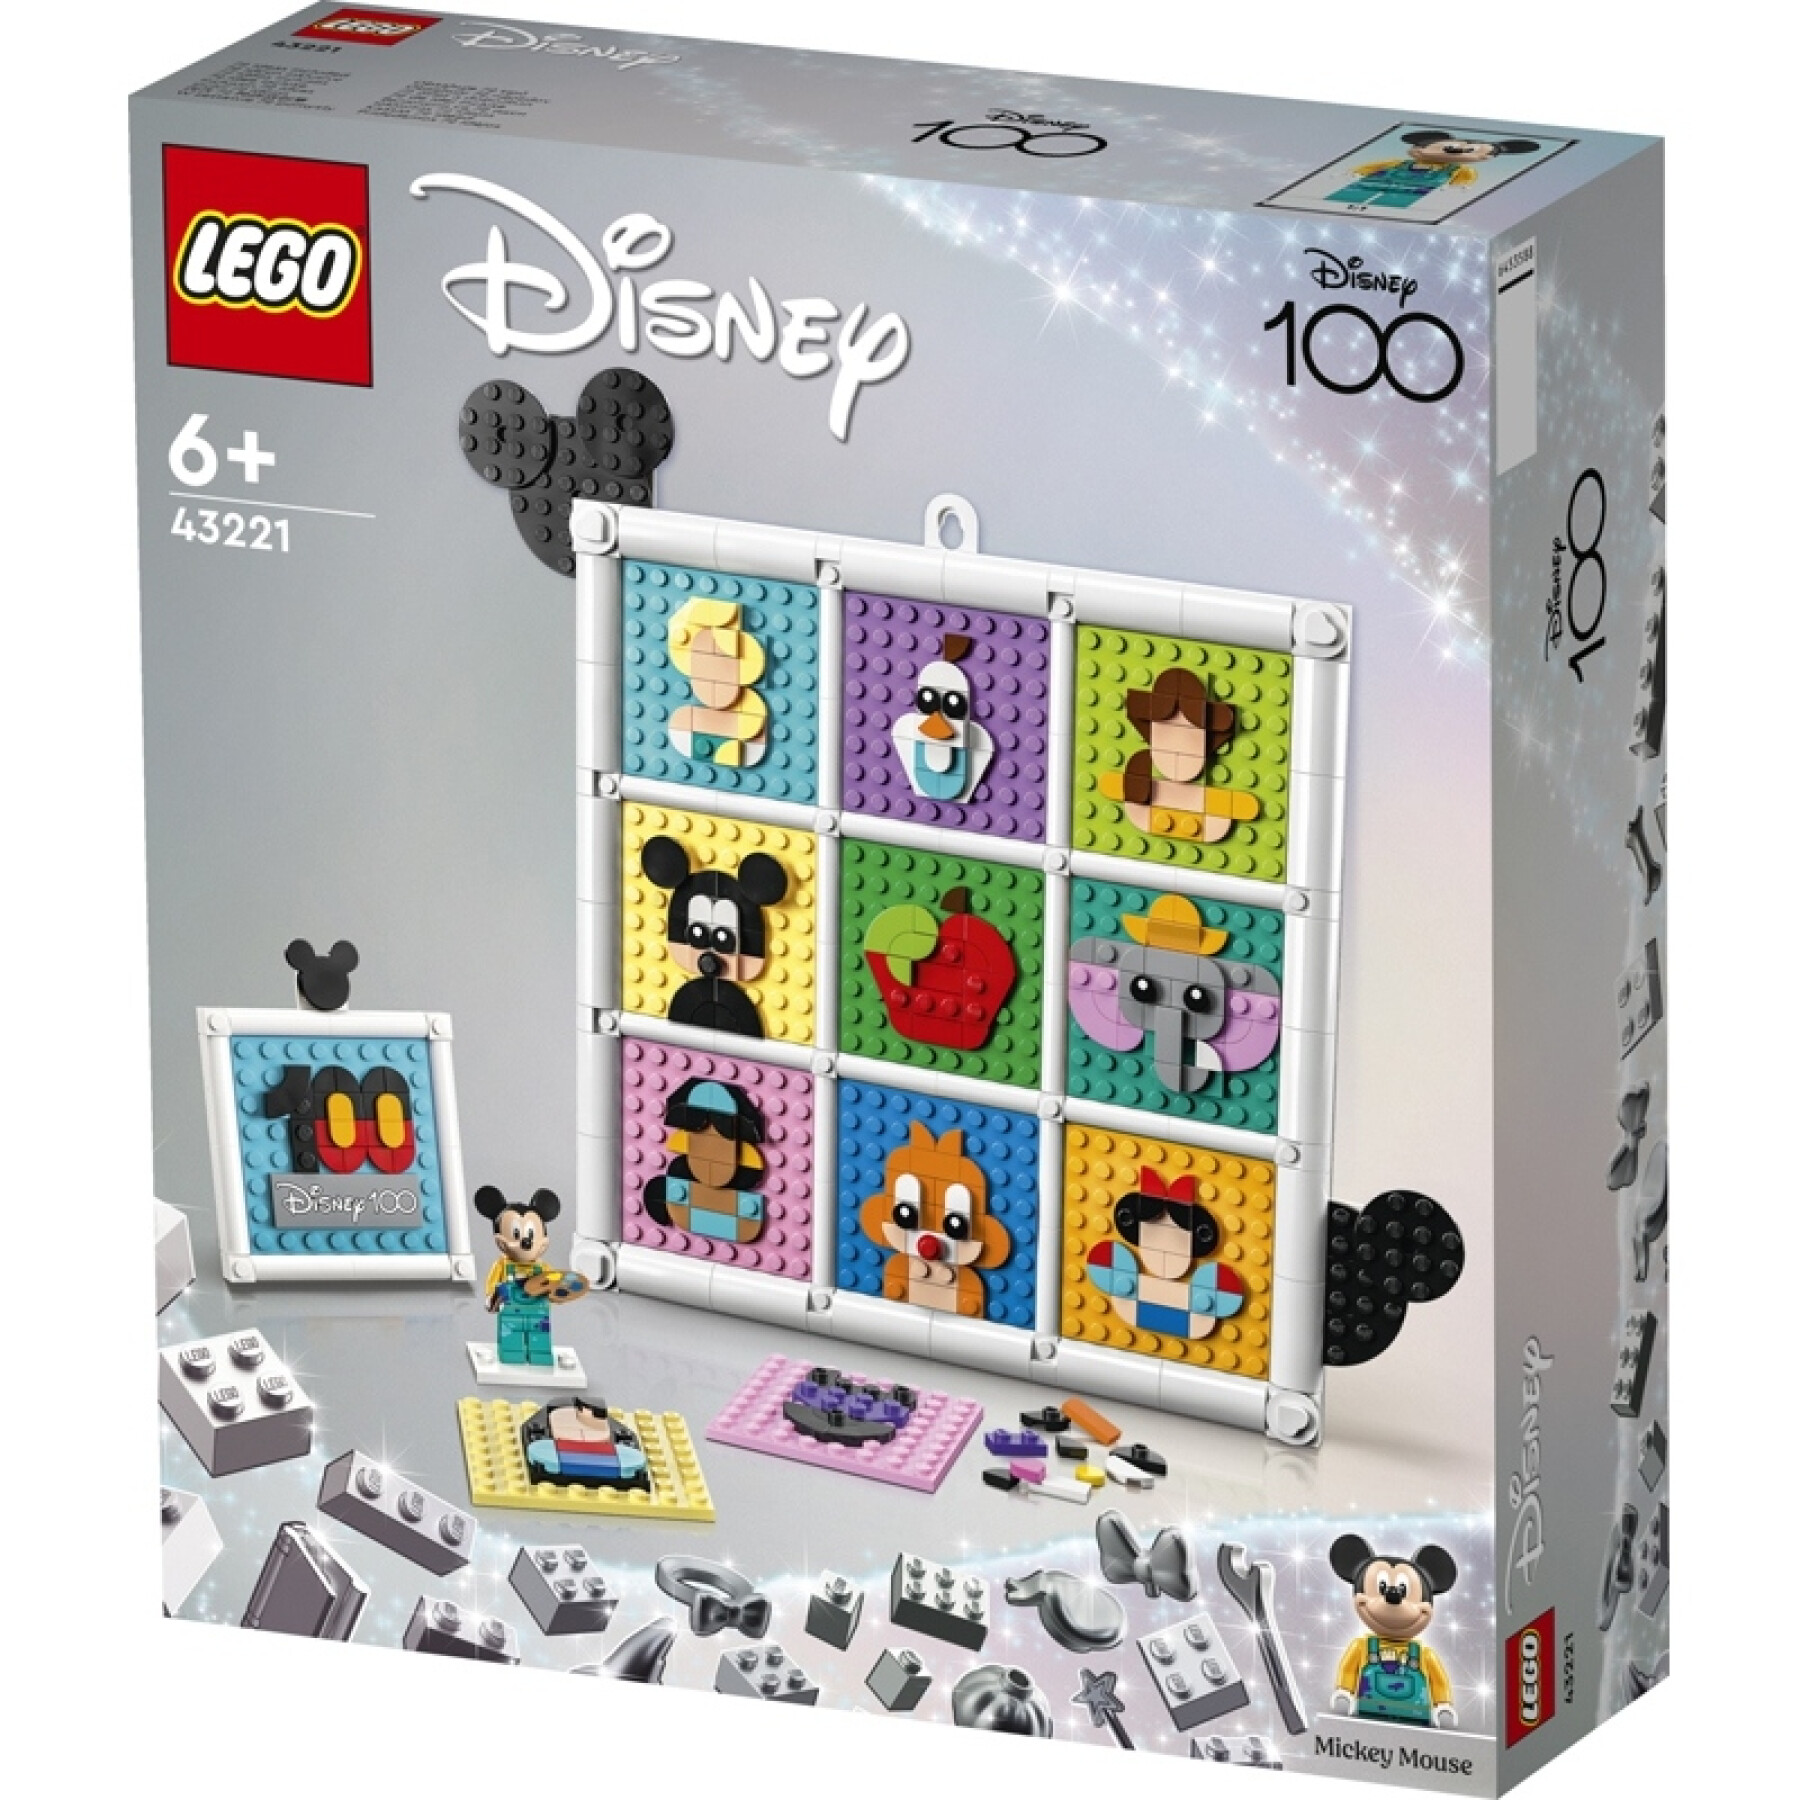 Building sets 100 years icons Lego Disney